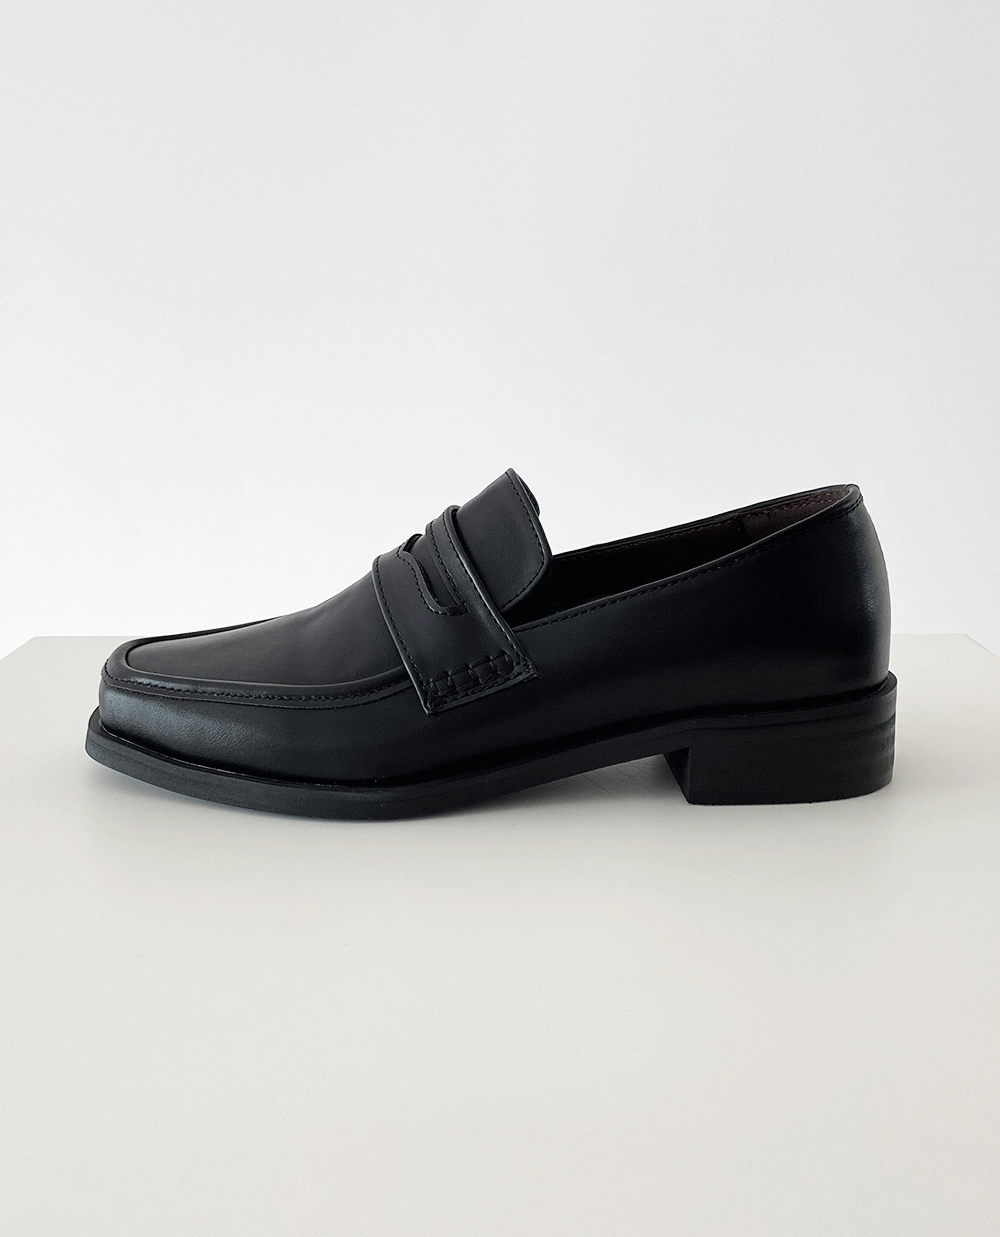 classic penny loafer